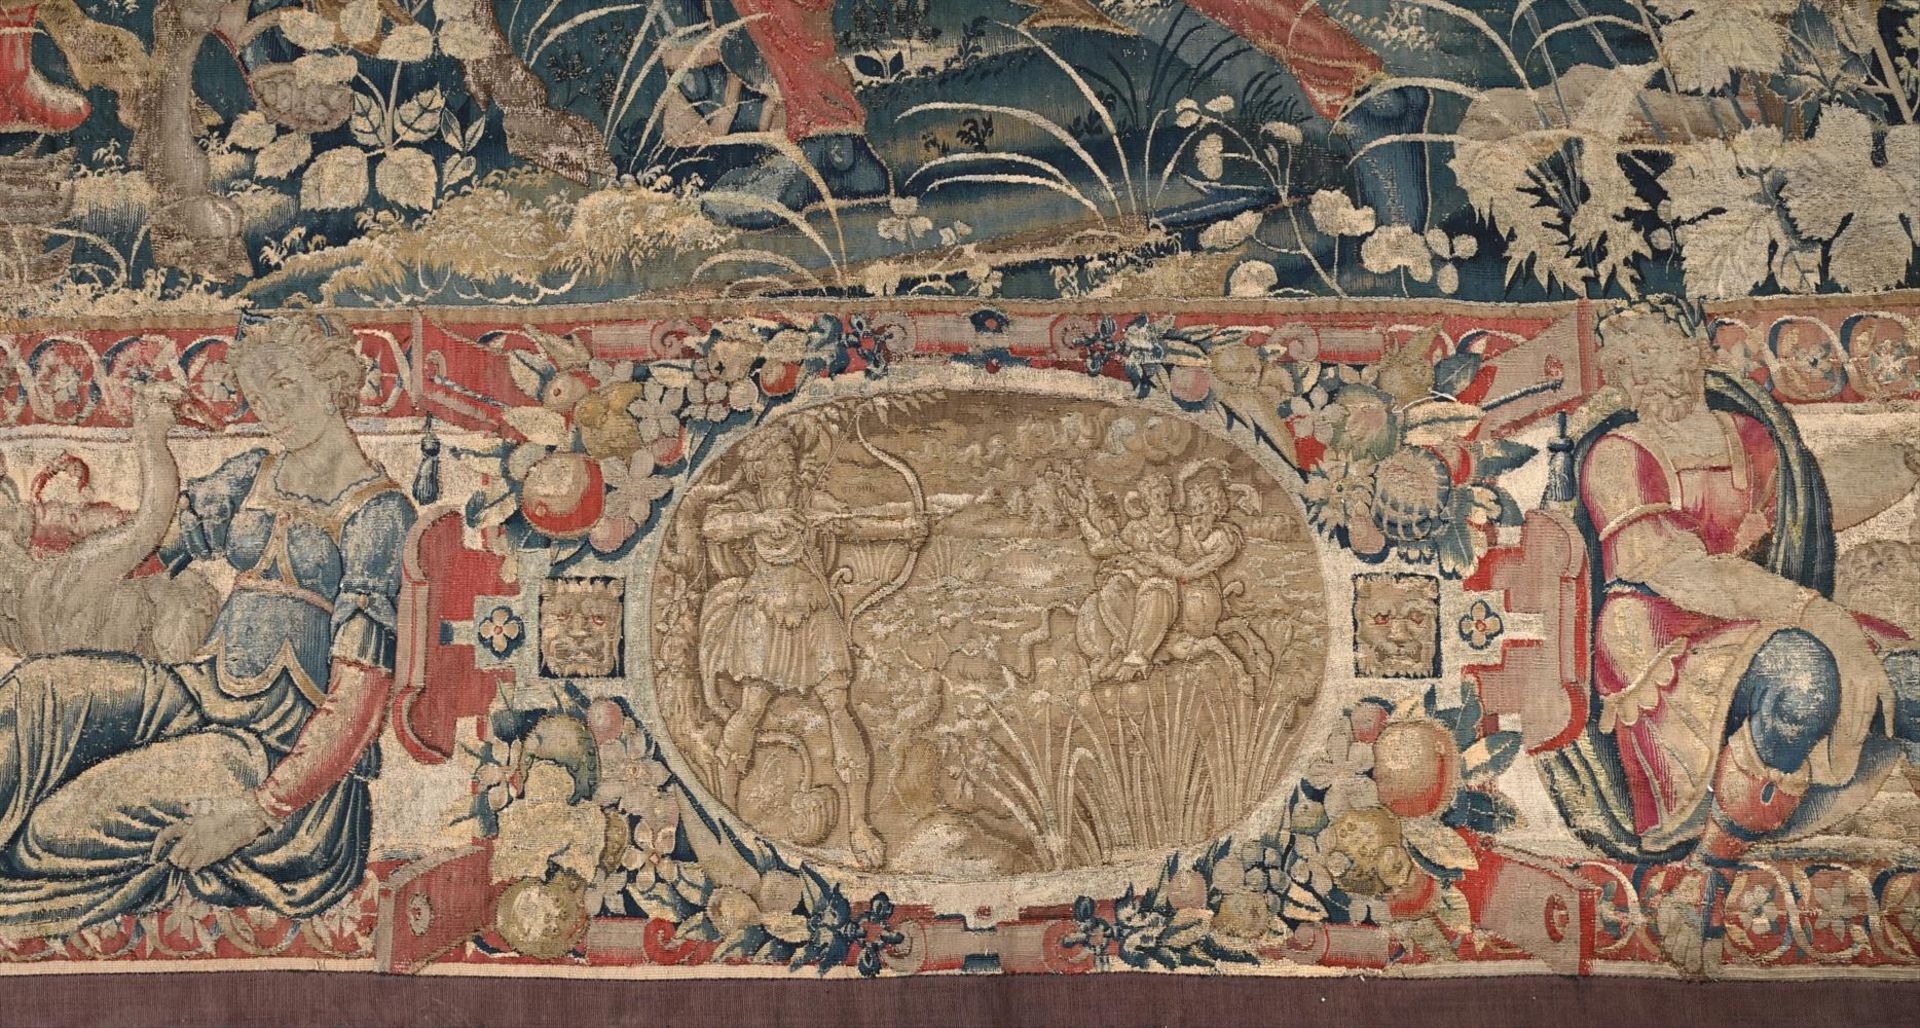 A RARE FLEMISH WOOL AND SILK HISTORICAL TAPESTRY DEPICTING A SCENE FROM THE LIFE OF HANNIBAL - Image 5 of 5